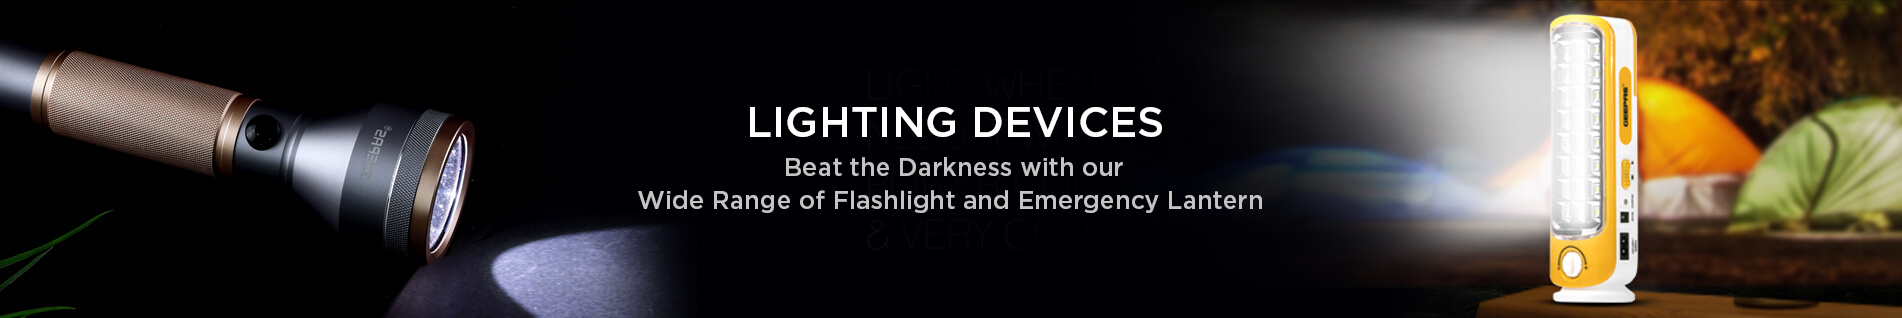 Lighting Devices